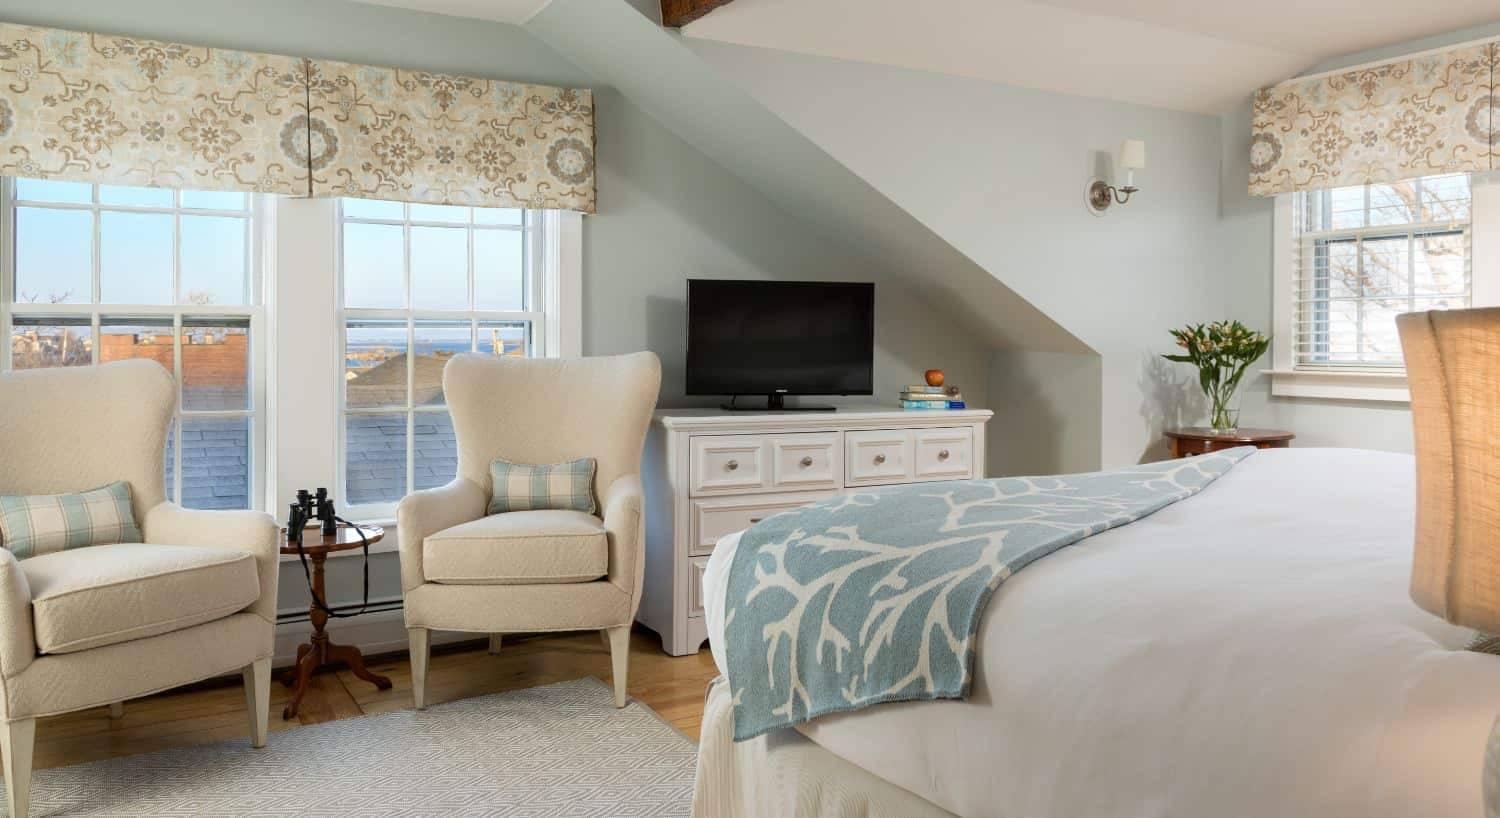 Large bedroom with wooden flooring, light blue walls, white bedding, white dresser, and sitting area with two cream upholstered chairs